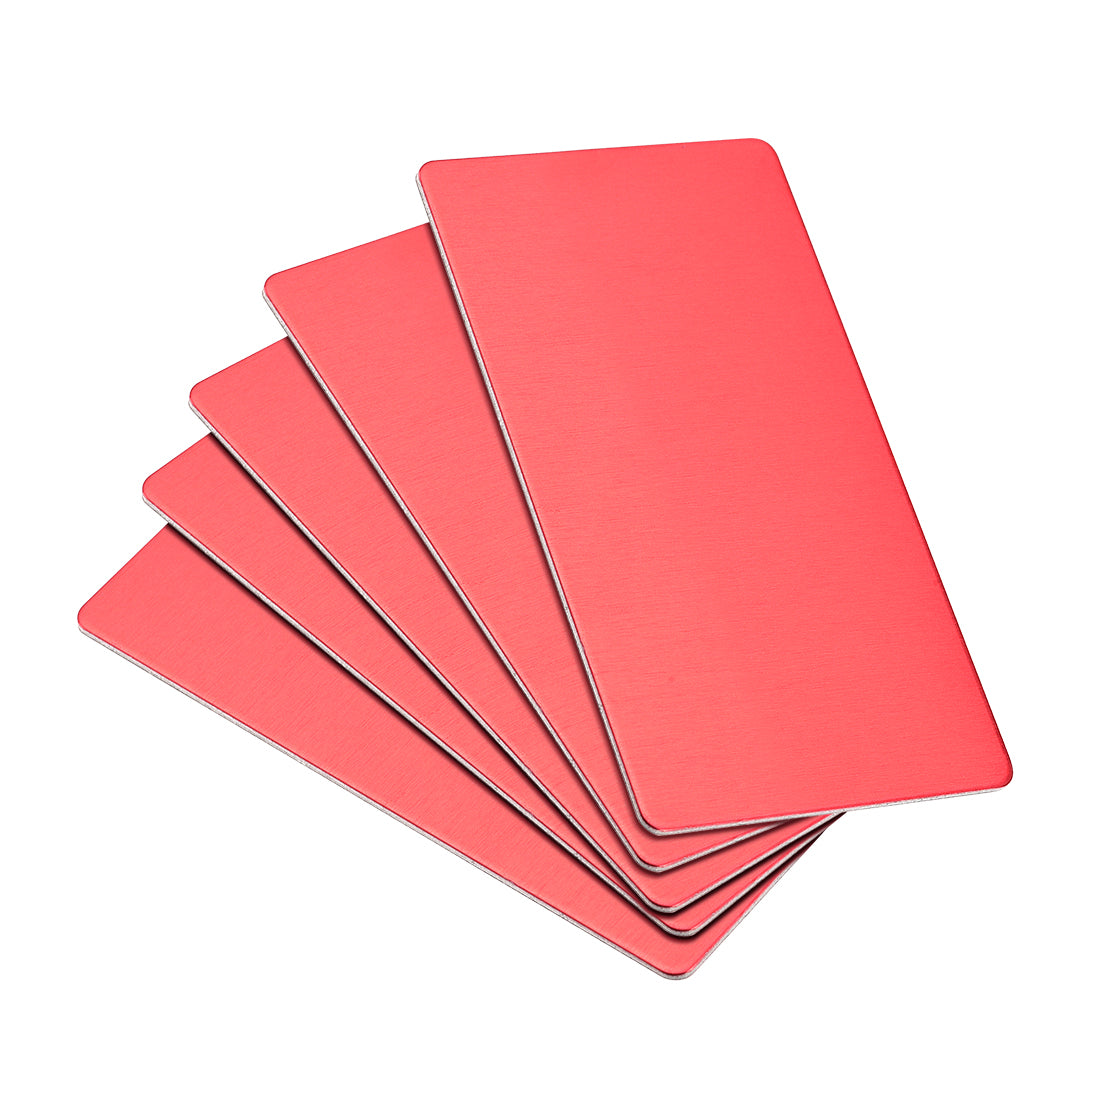 uxcell Uxcell Blank Metal Cards Anodized Aluminum Plate for DIY Laser Printing